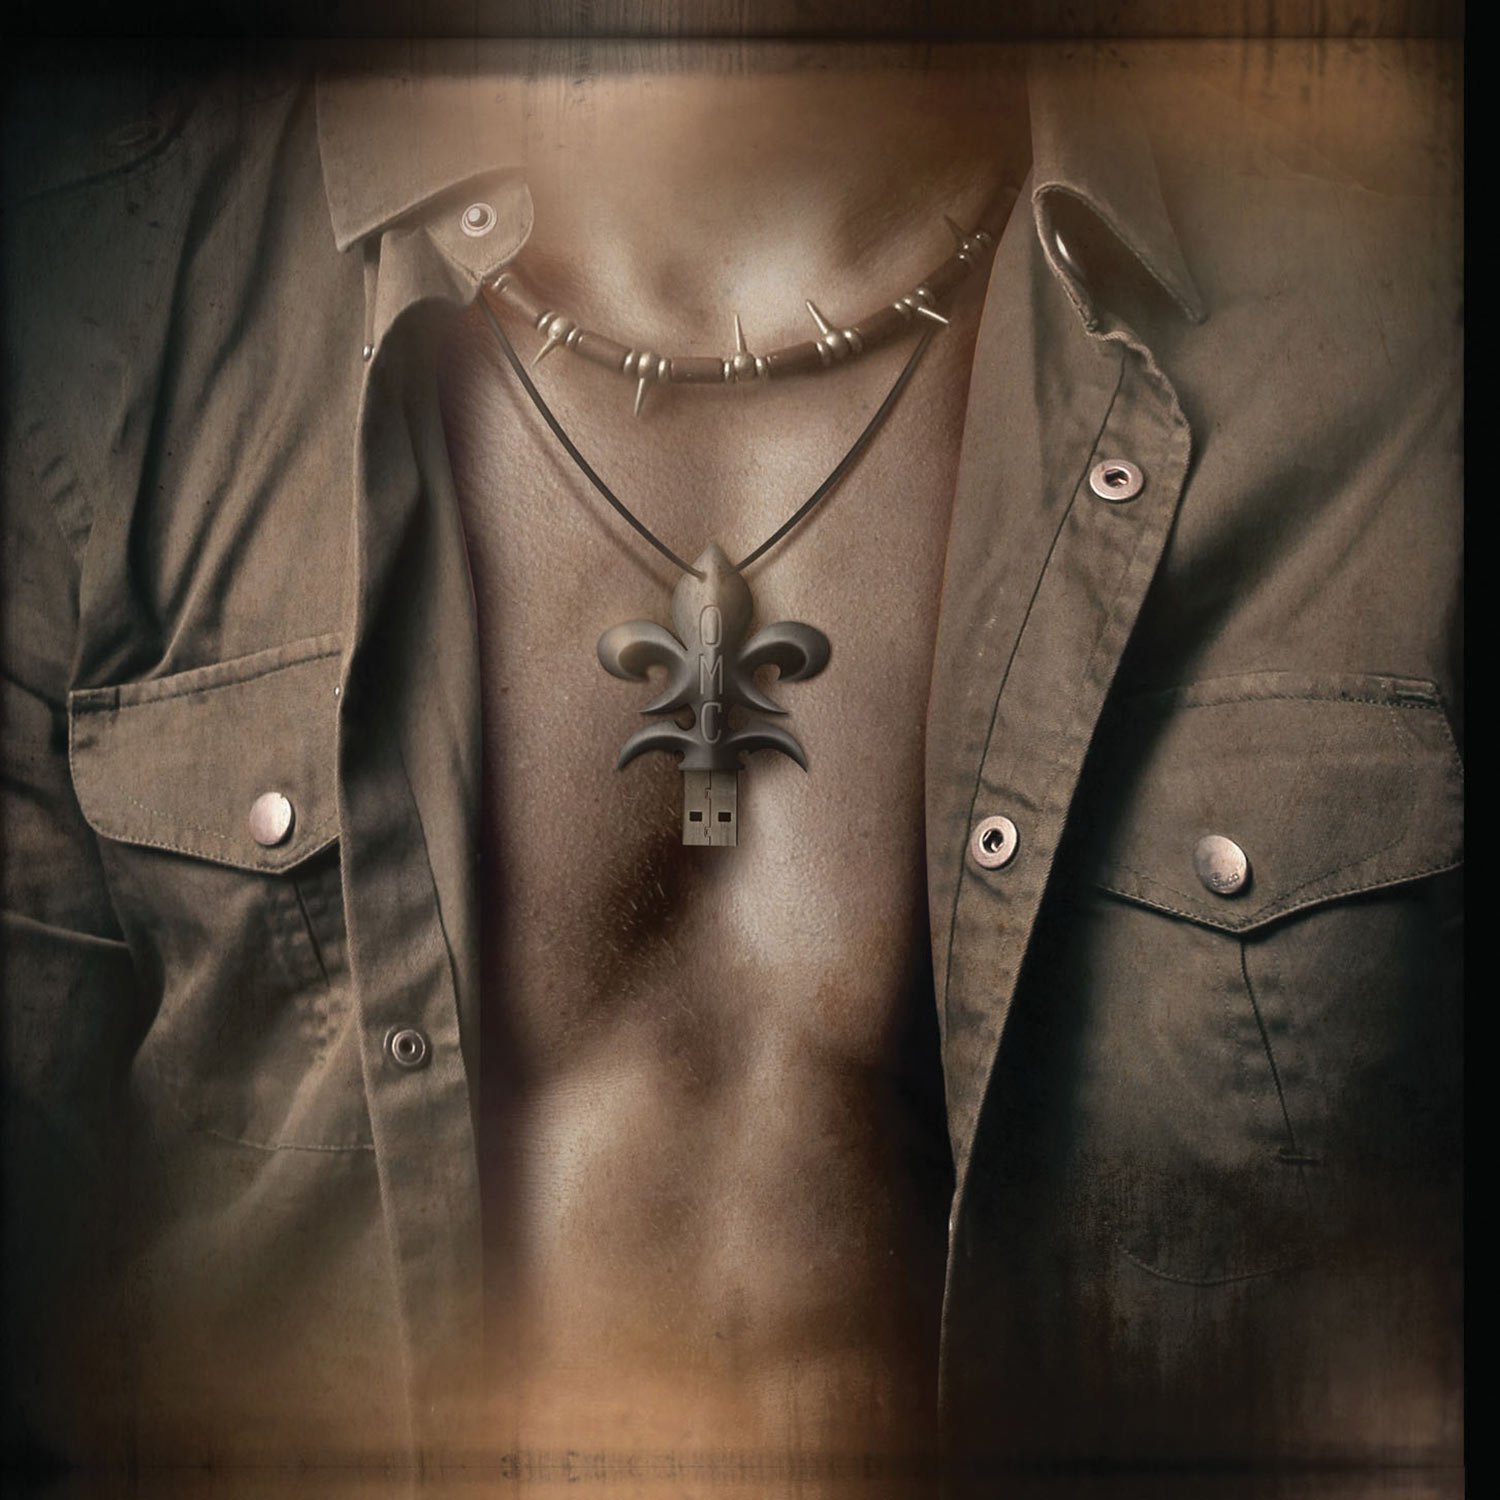 Operation: Mindcrime – The Key Review